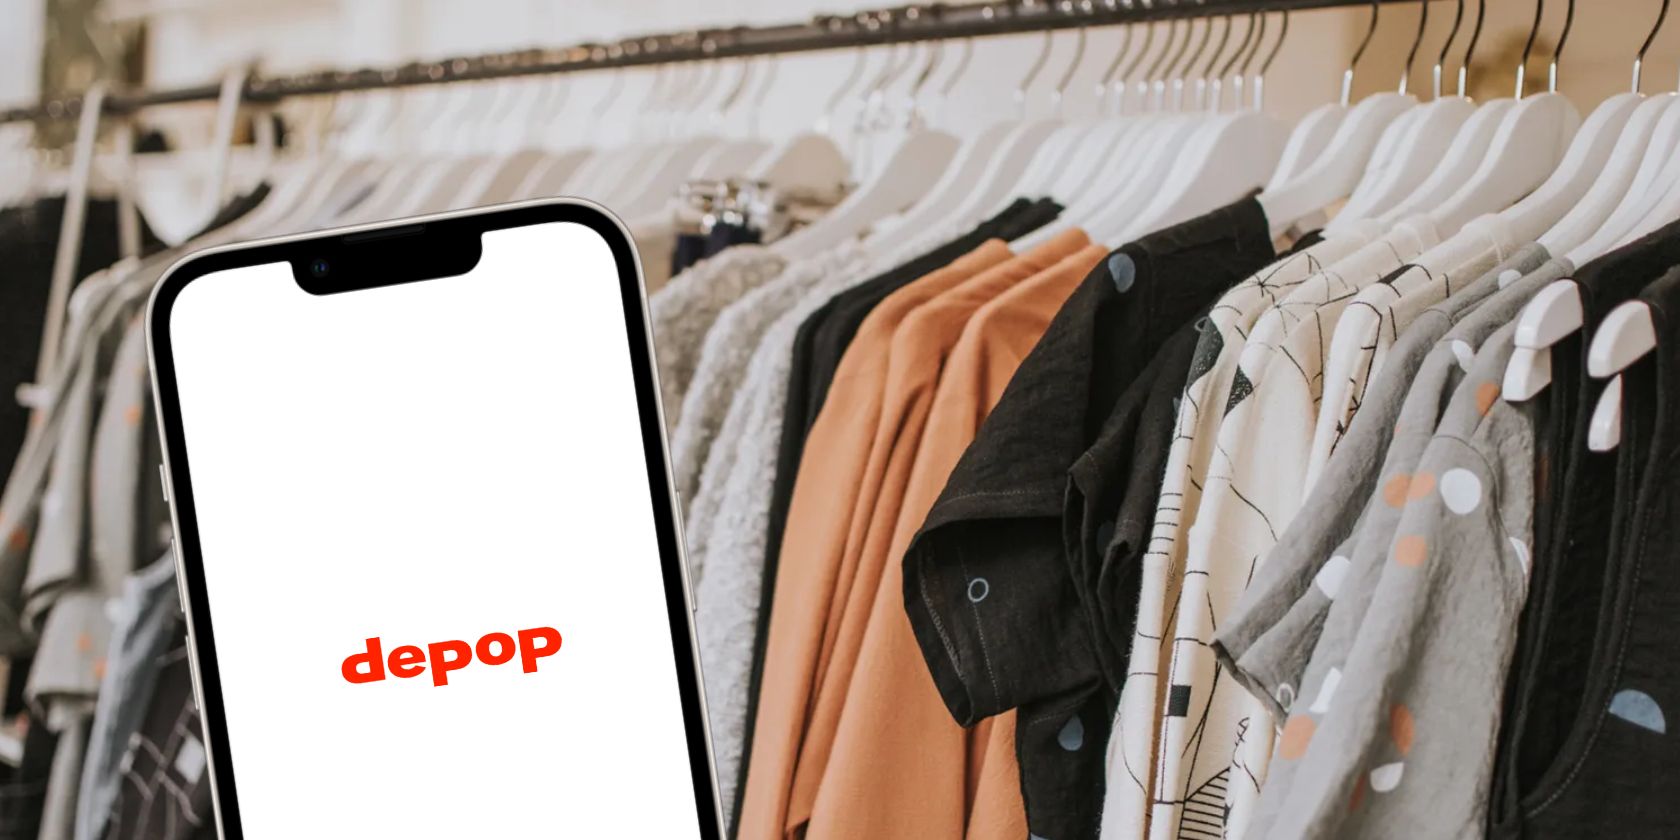 The Depot app on iPhone in front of a clothing store